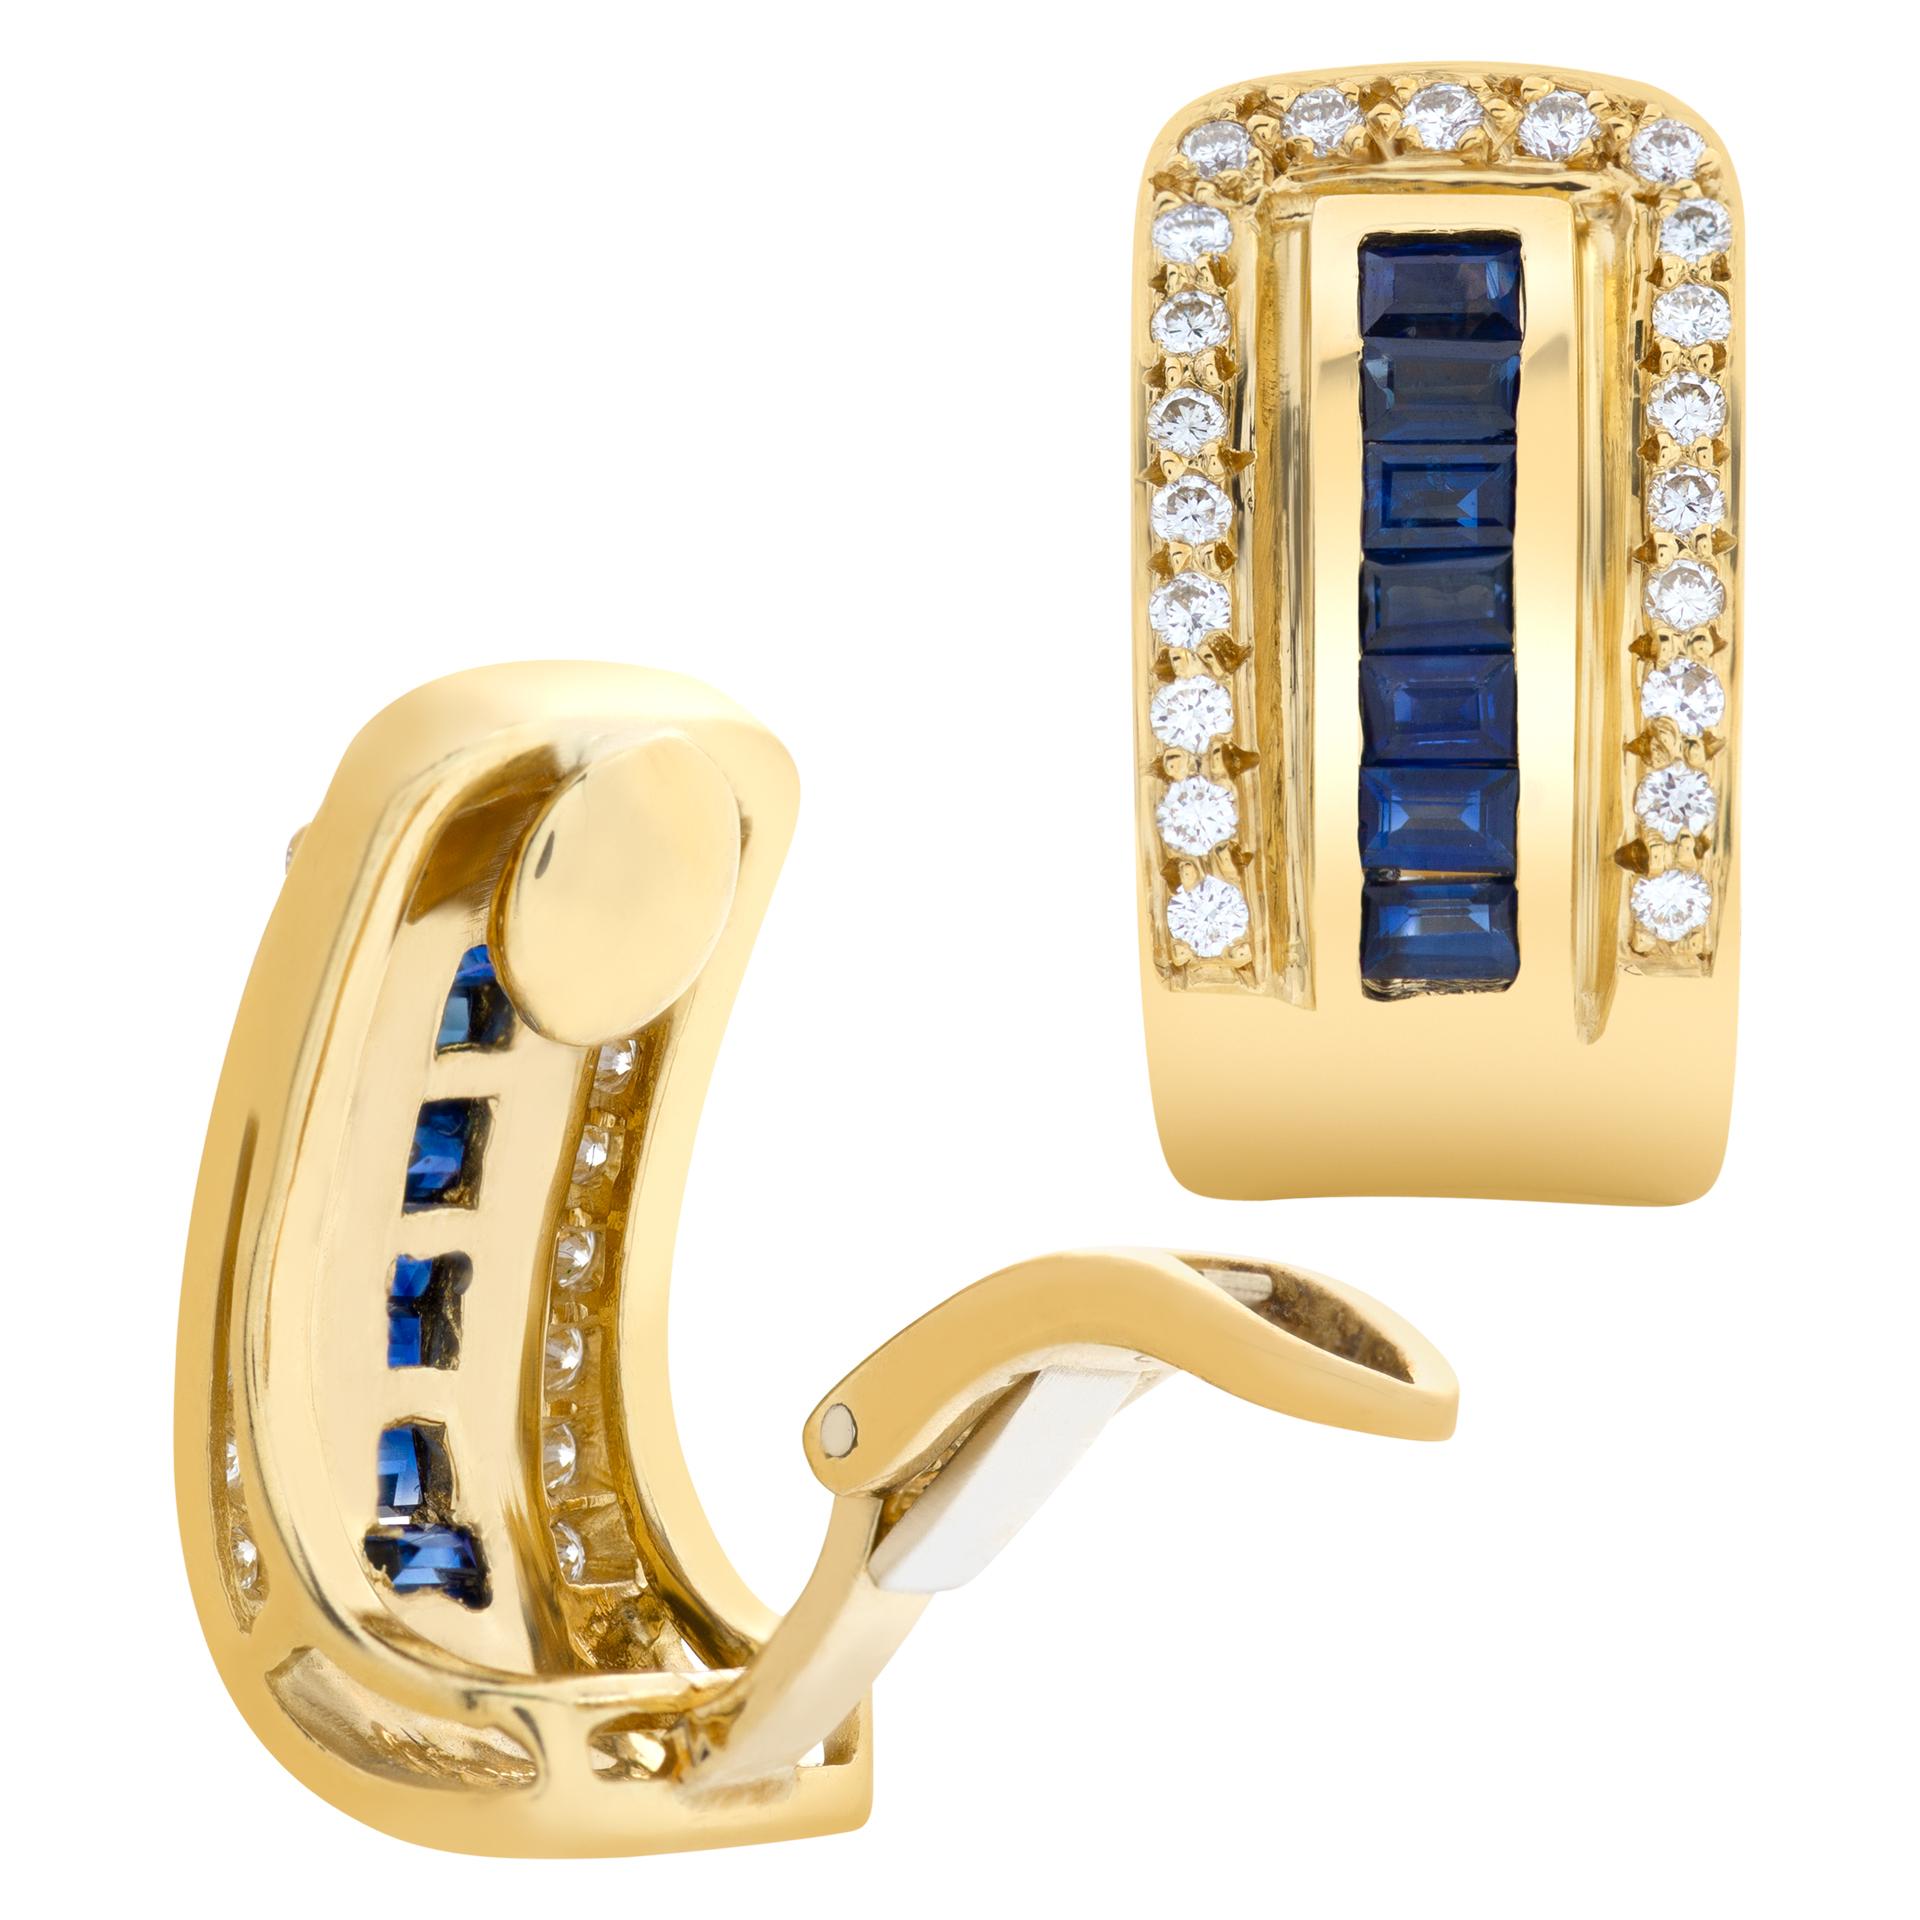 ESTIMATED RETAIL $4,700.00 - YOUR PRICE $3,490.00 - Elegant pair of 18K yellow gold semi hoop style earrings. Tapered baguette sapphires (totaling approximately 1 carat) & full cut round brilliant diamond (totaling approximately 0.75 carats).